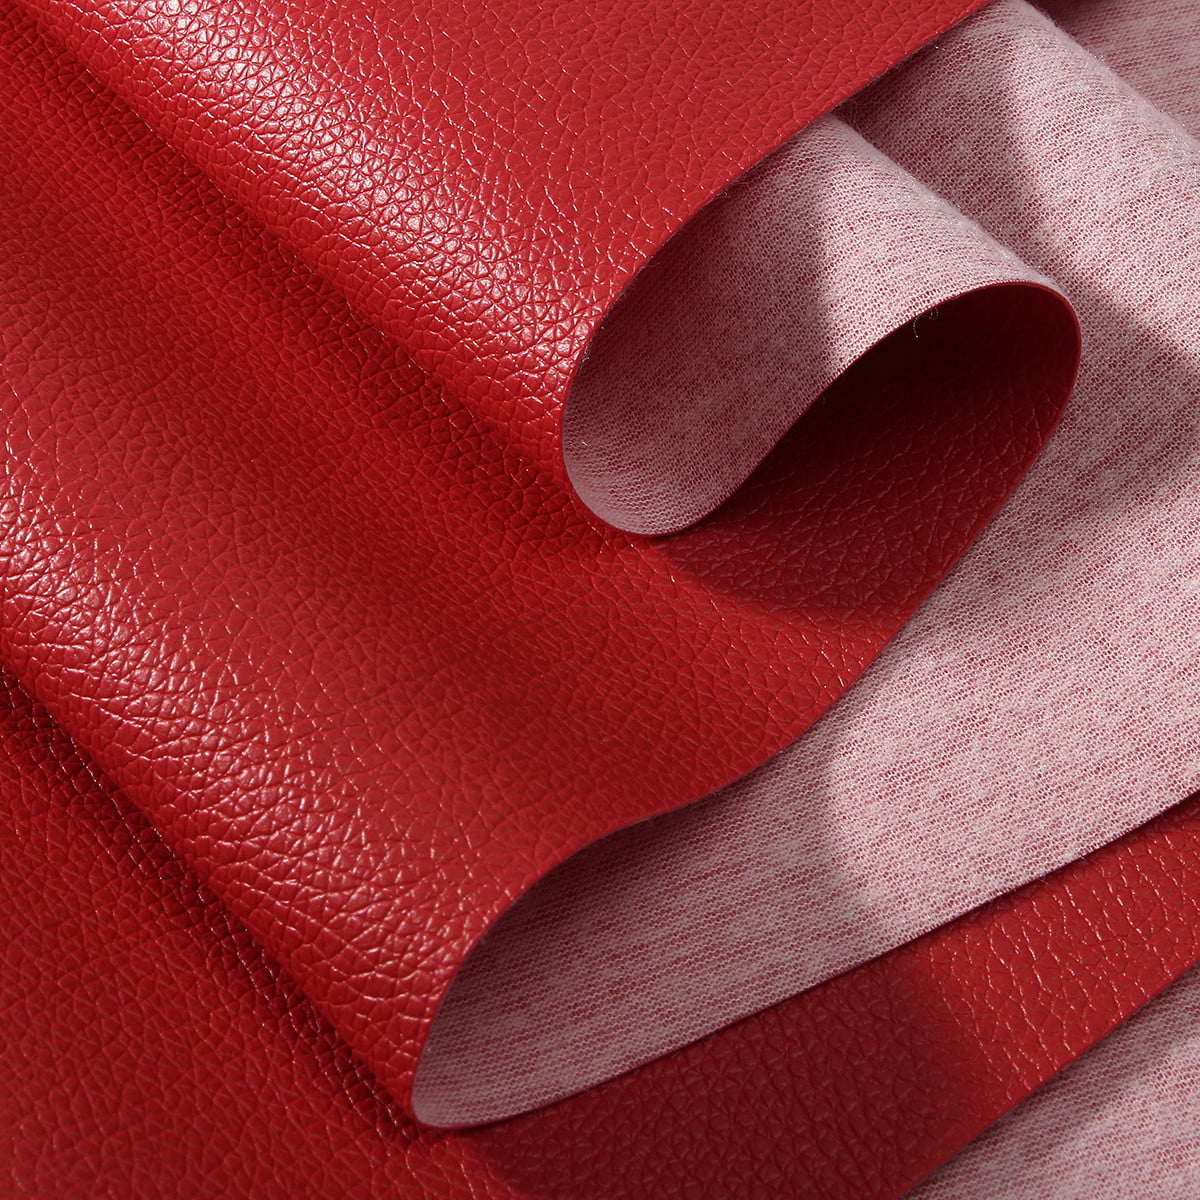 Pu Faux Leather Fabric Car Interior, Upholstery Leather Fabric By The Yard